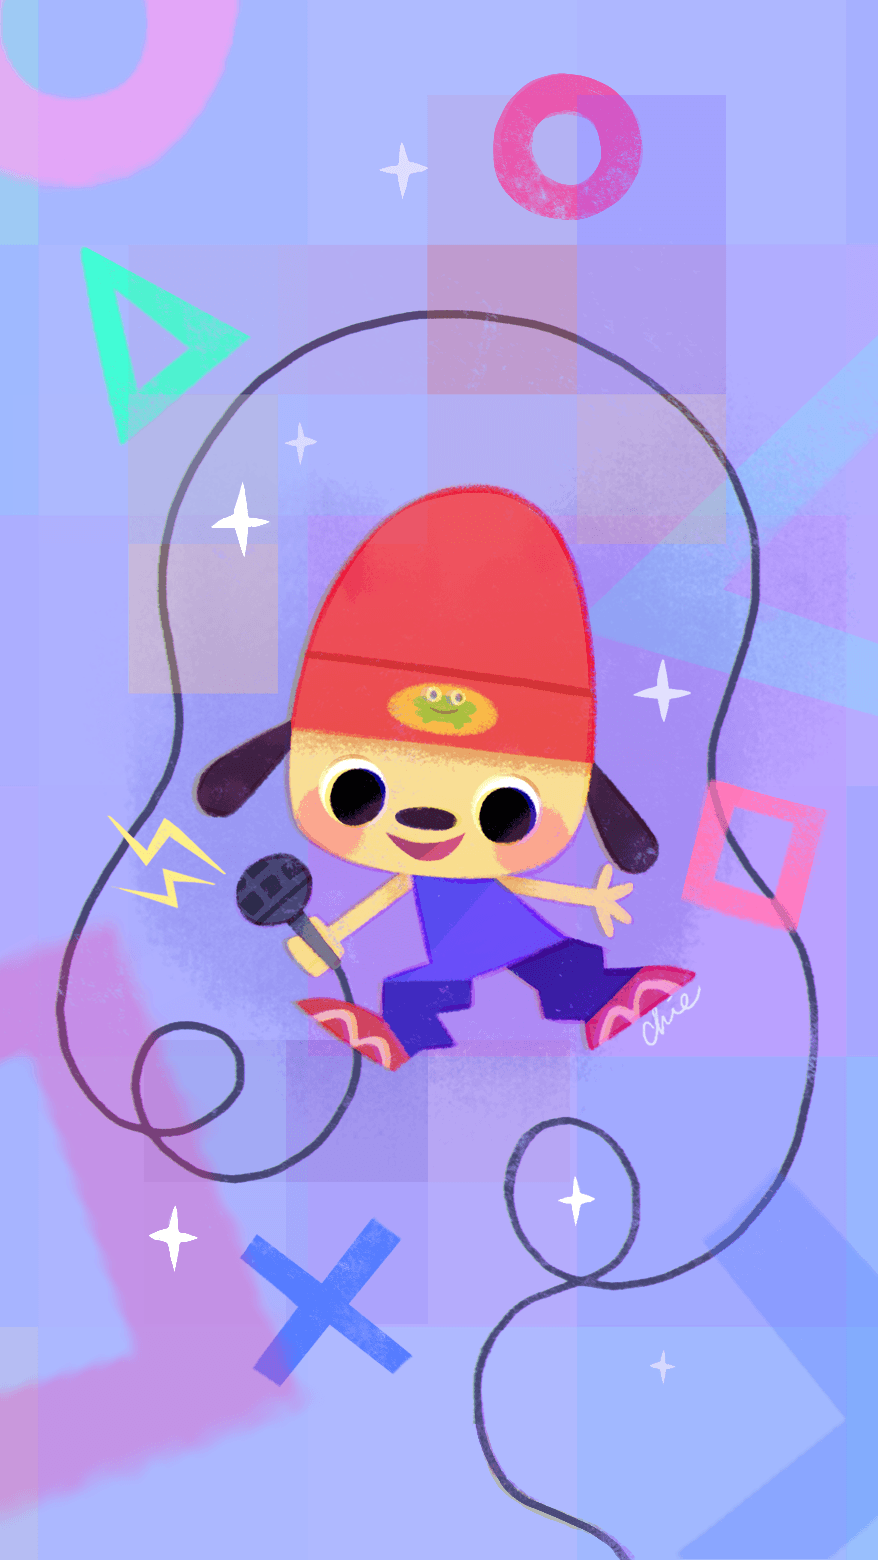 Parappa the Rapper remaster coming to PS4! happy 20th. Art